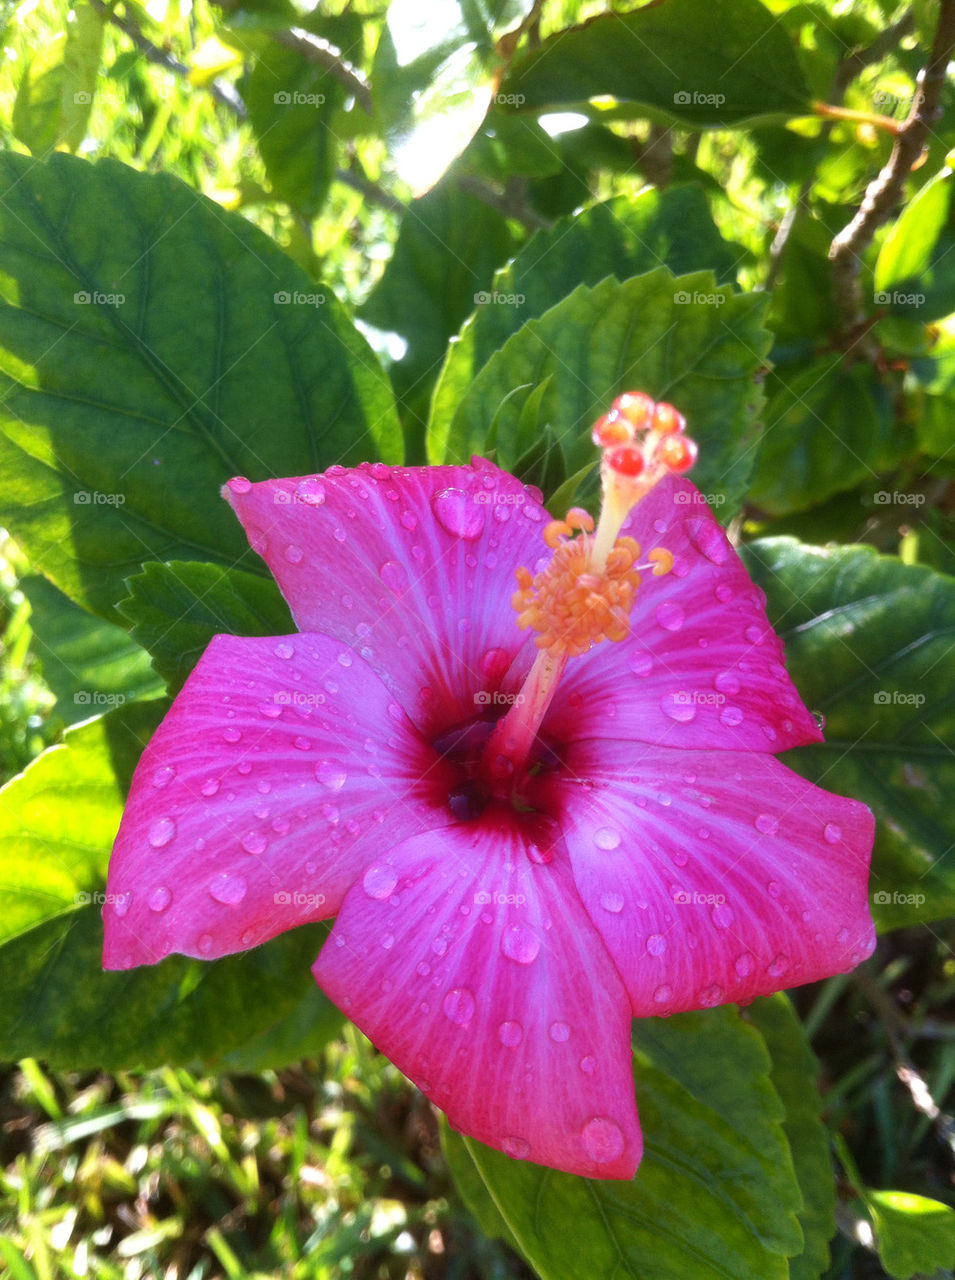 Hibiscus after the rain!